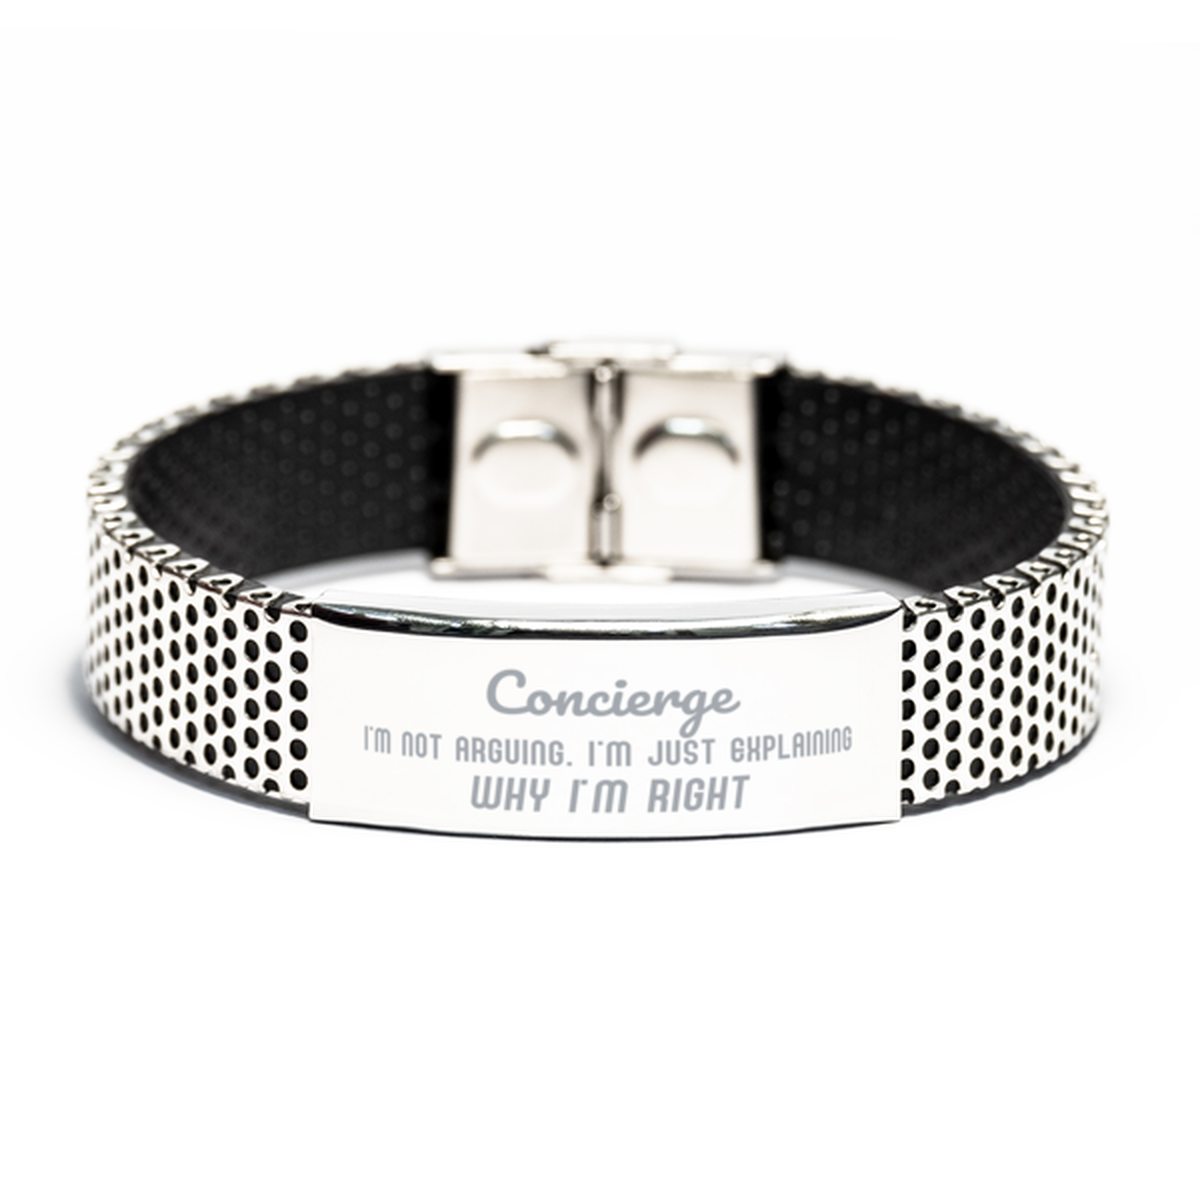 Concierge I'm not Arguing. I'm Just Explaining Why I'm RIGHT Stainless Steel Bracelet, Funny Saying Quote Concierge Gifts For Concierge Graduation Birthday Christmas Gifts for Men Women Coworker